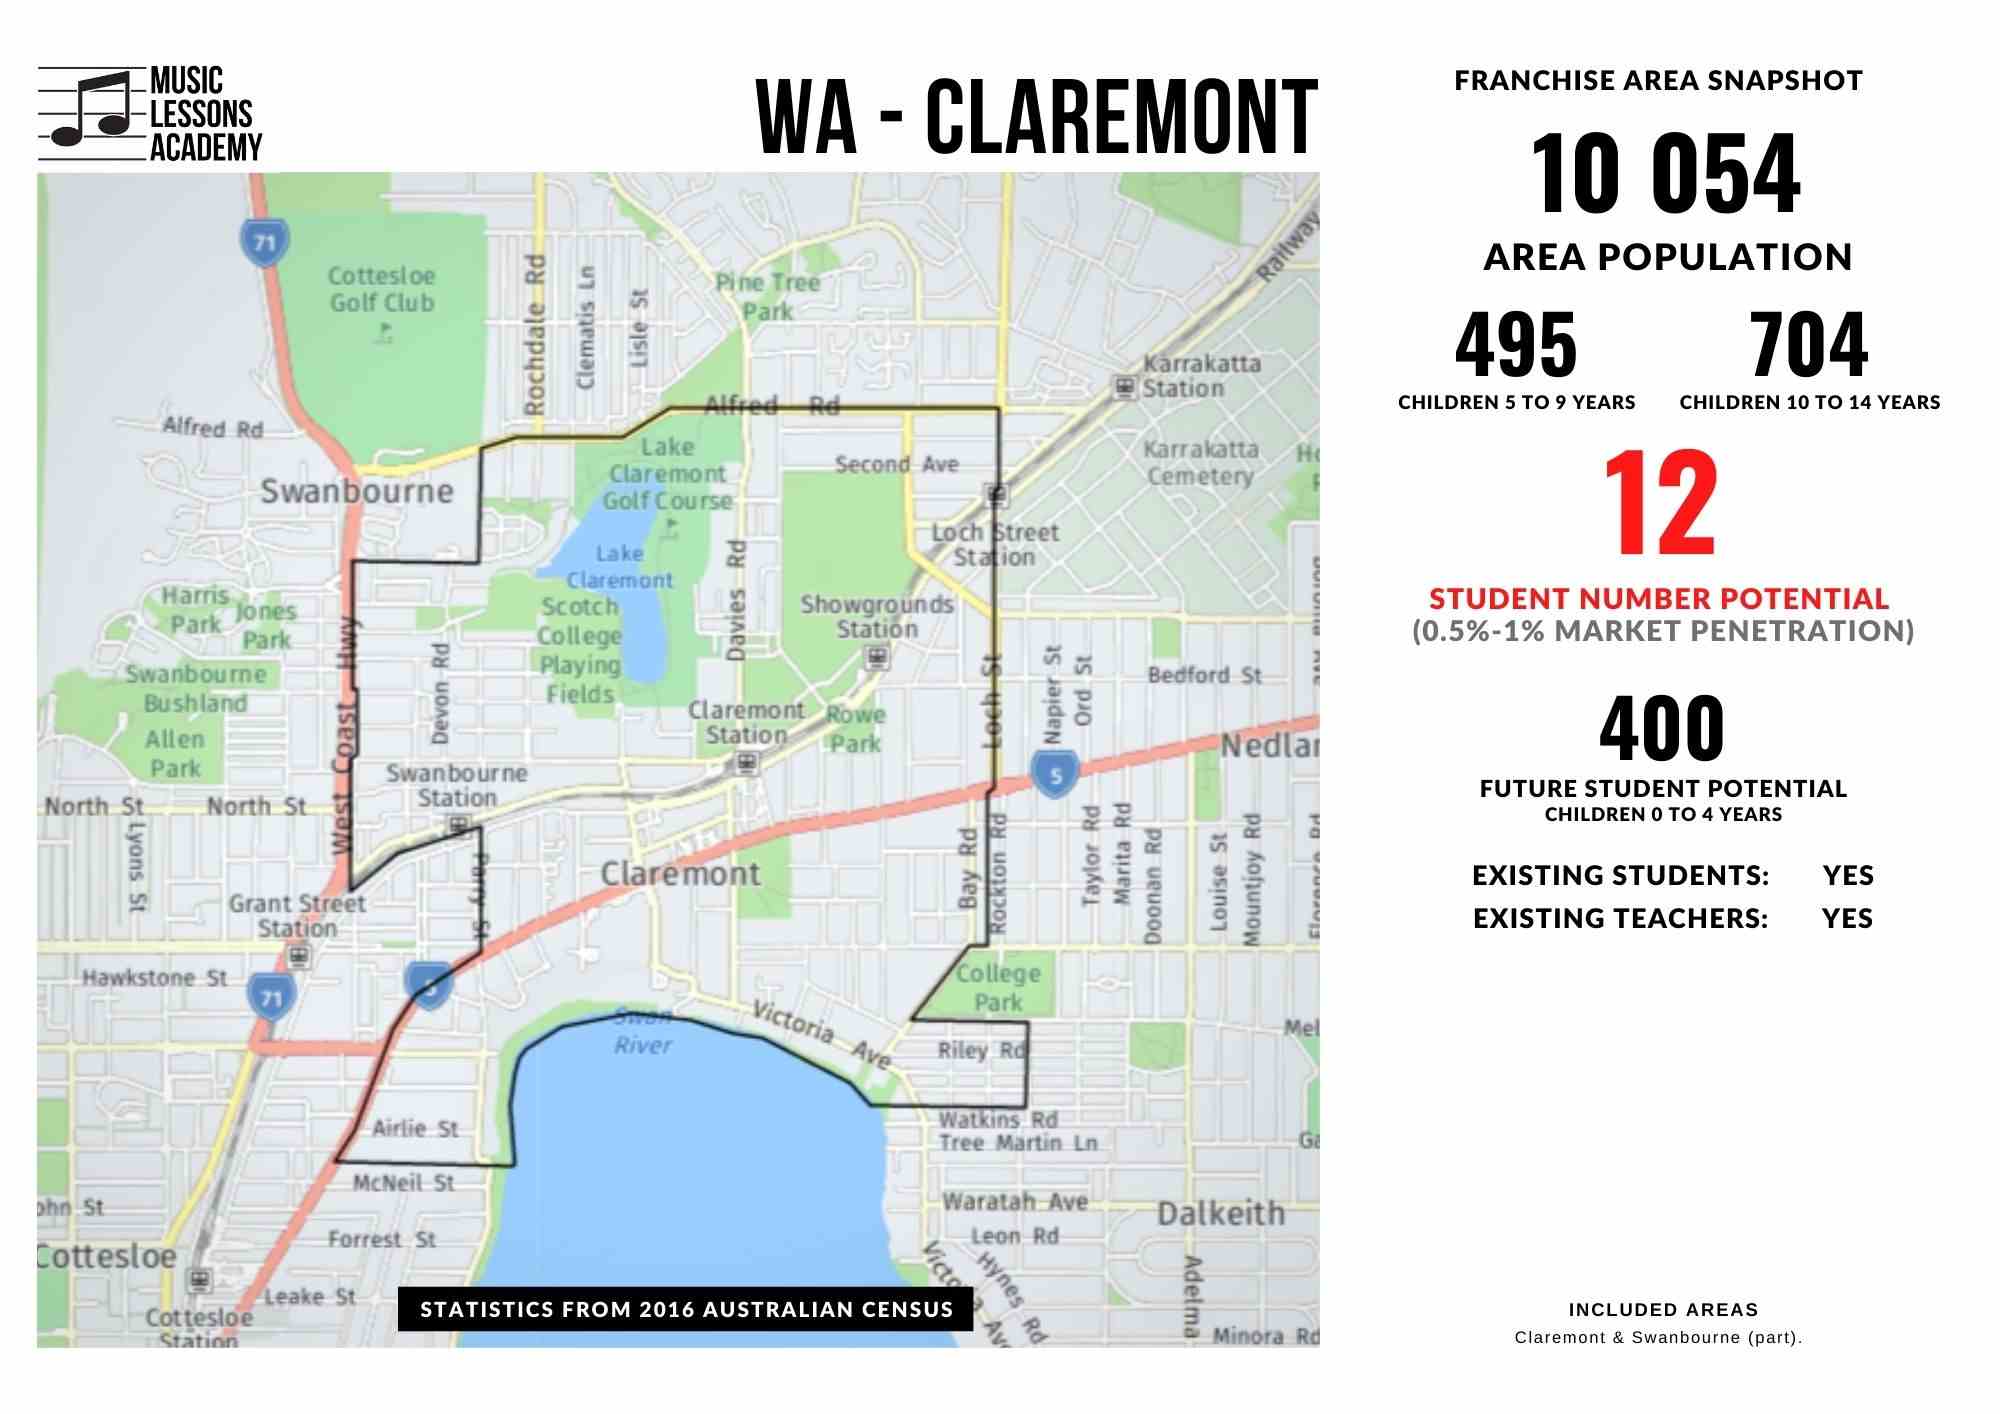 WA Claremont Franchise for sale